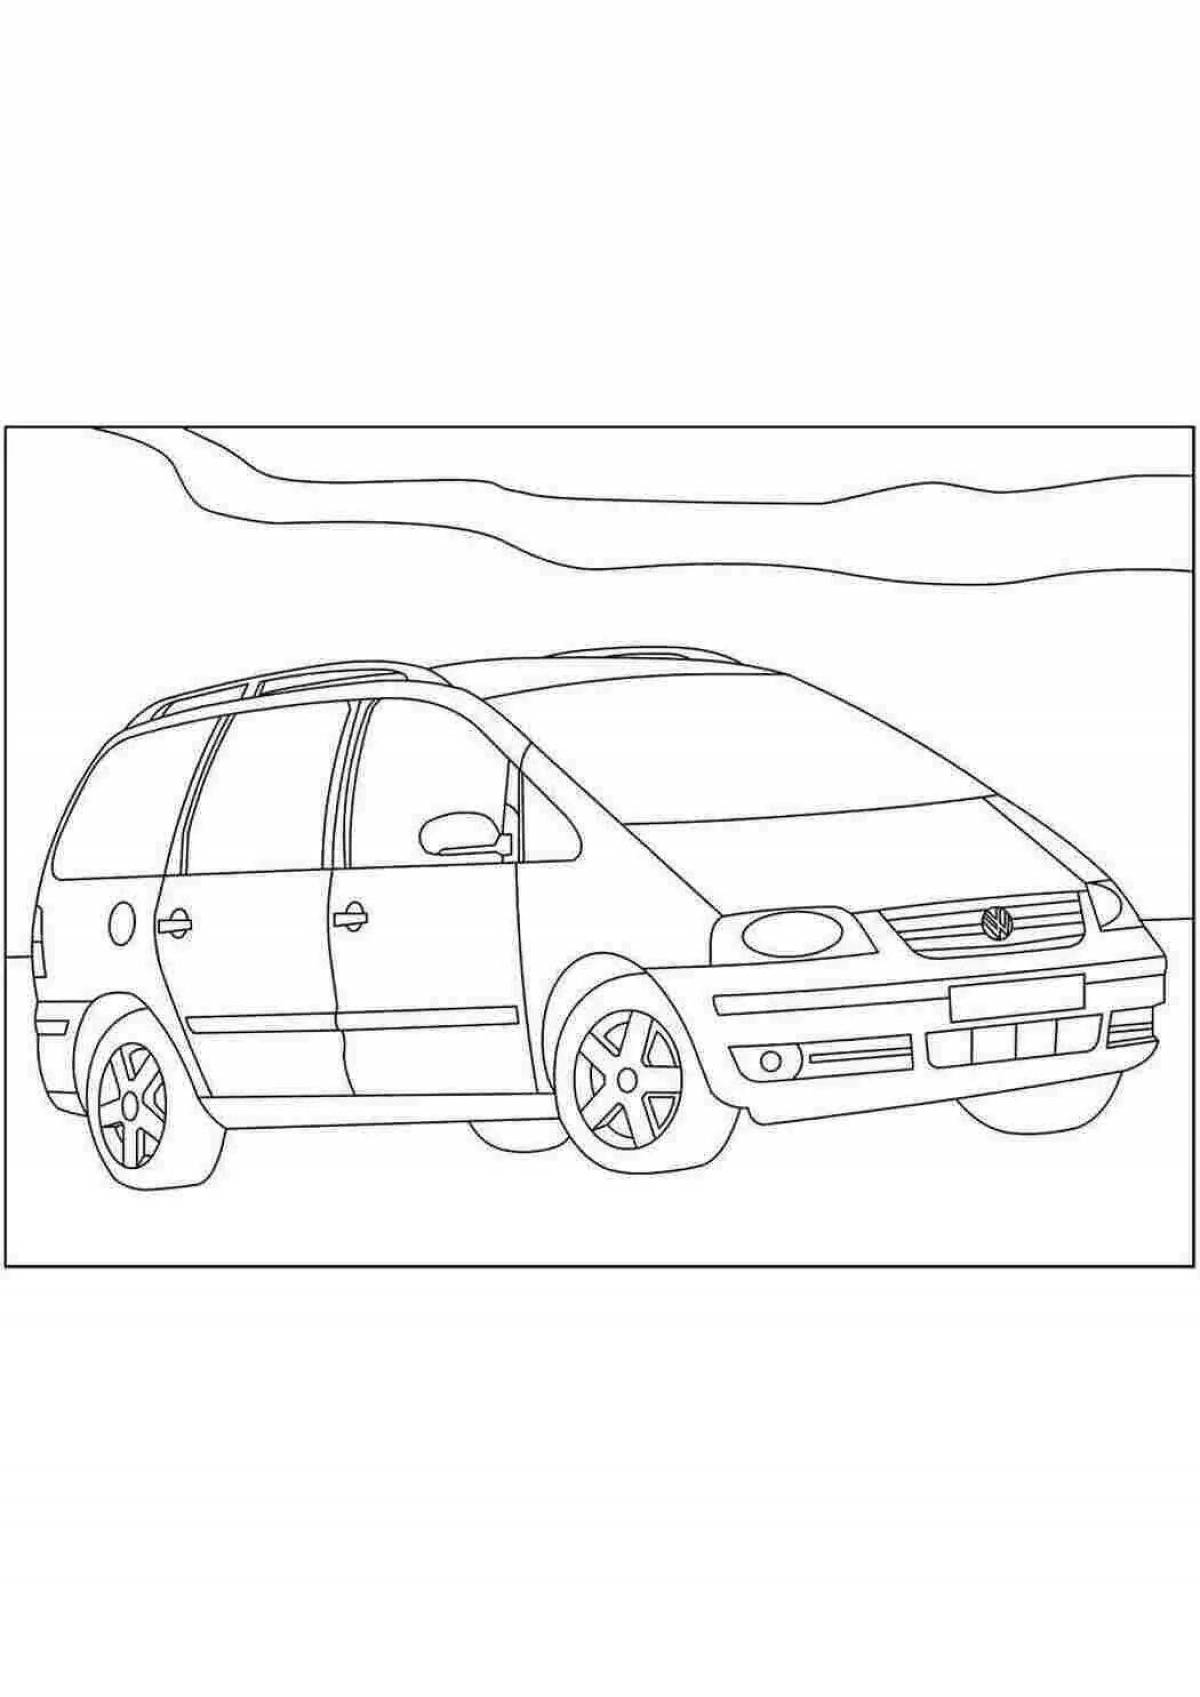 Coloring page stylish volkswagen car